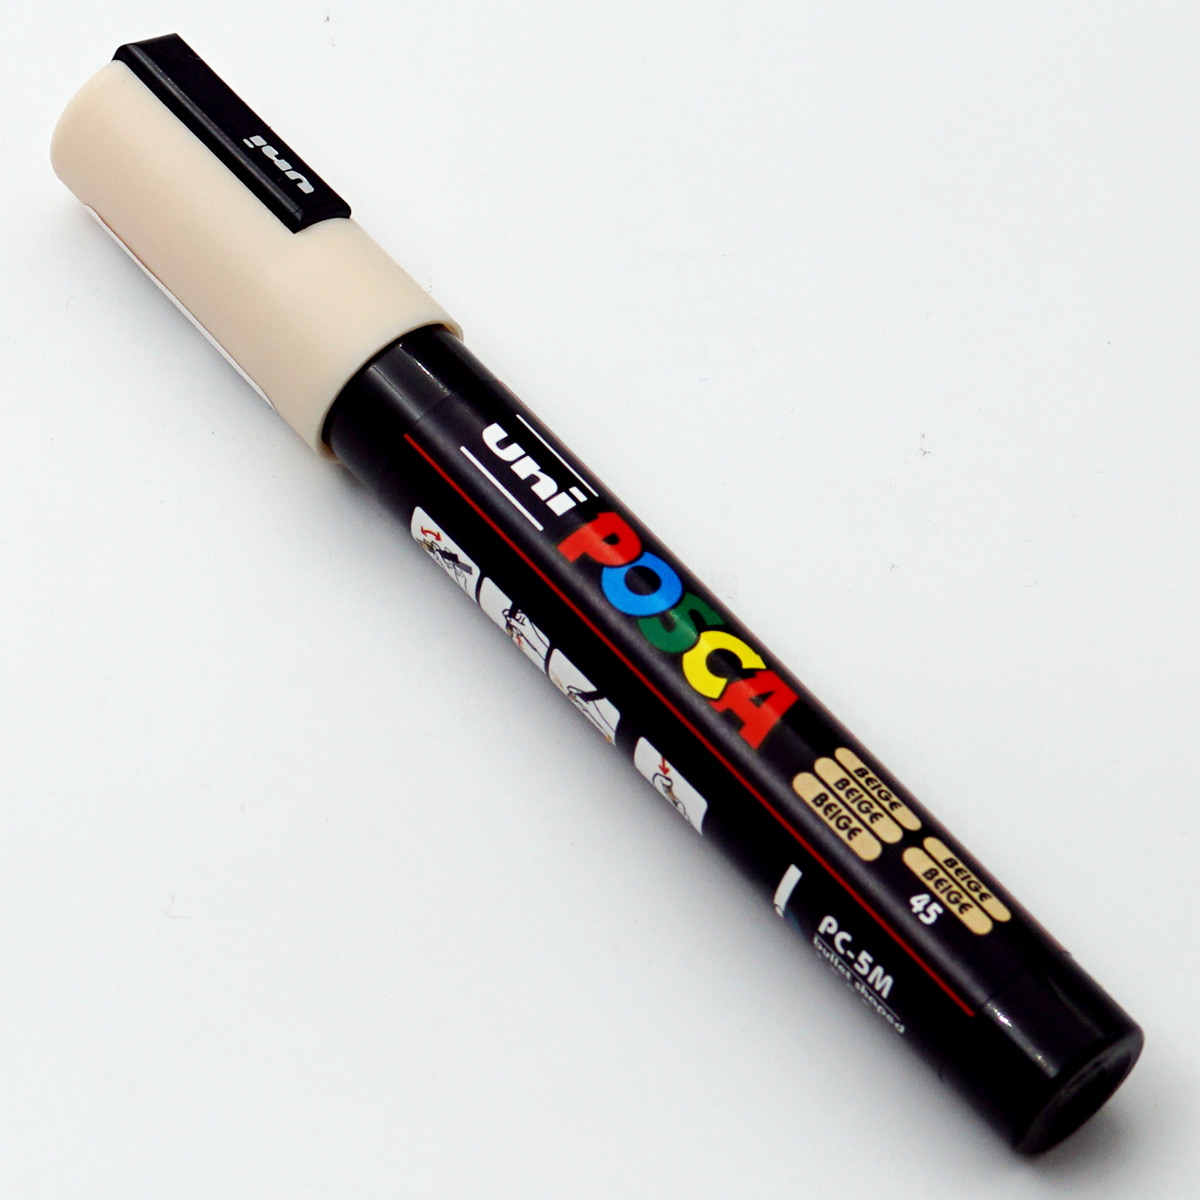 Uniball Posca PC-5M Bullet Medium Tip 1.8 - 2.5mm Beige Color and Water Based Paint Marker SKU24616